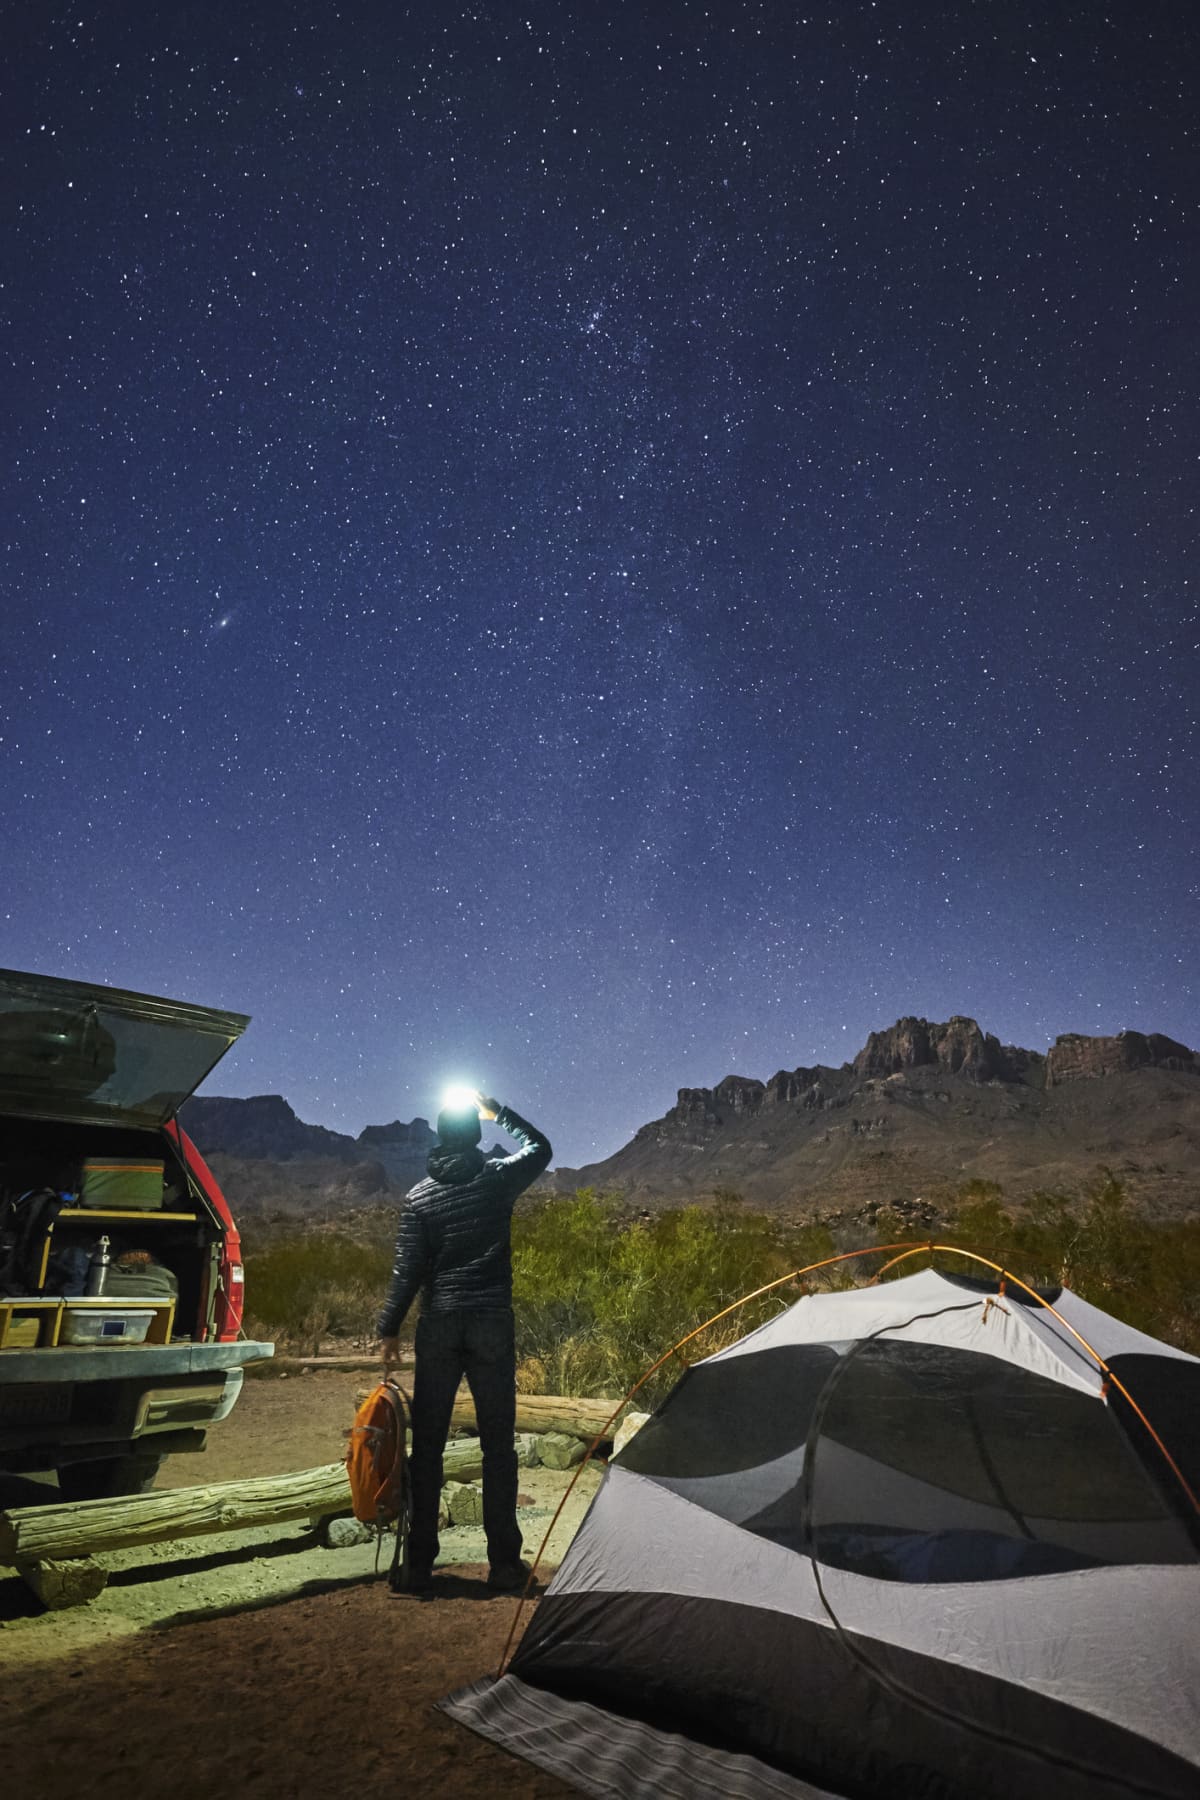 A man camping and taking a picture of the night stars in the Texas sky